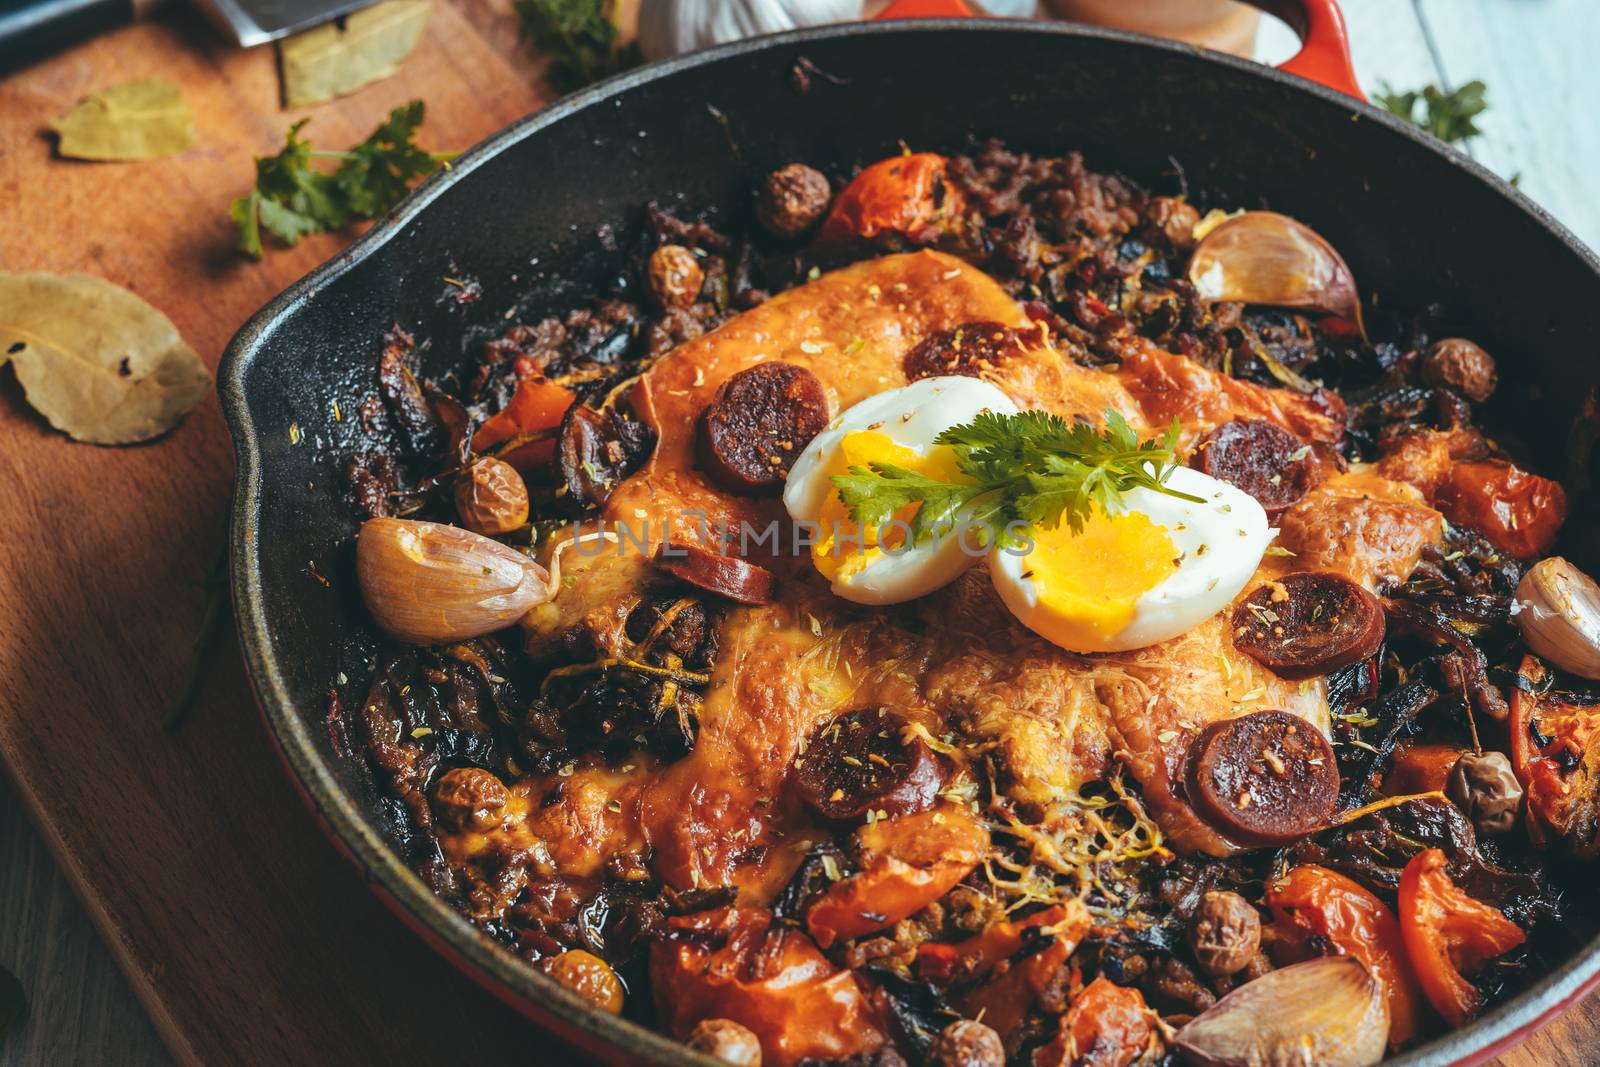 Wrought iron skillet with vegetables, meat, egg, gratin cheese and coriander on a rustic wooden table